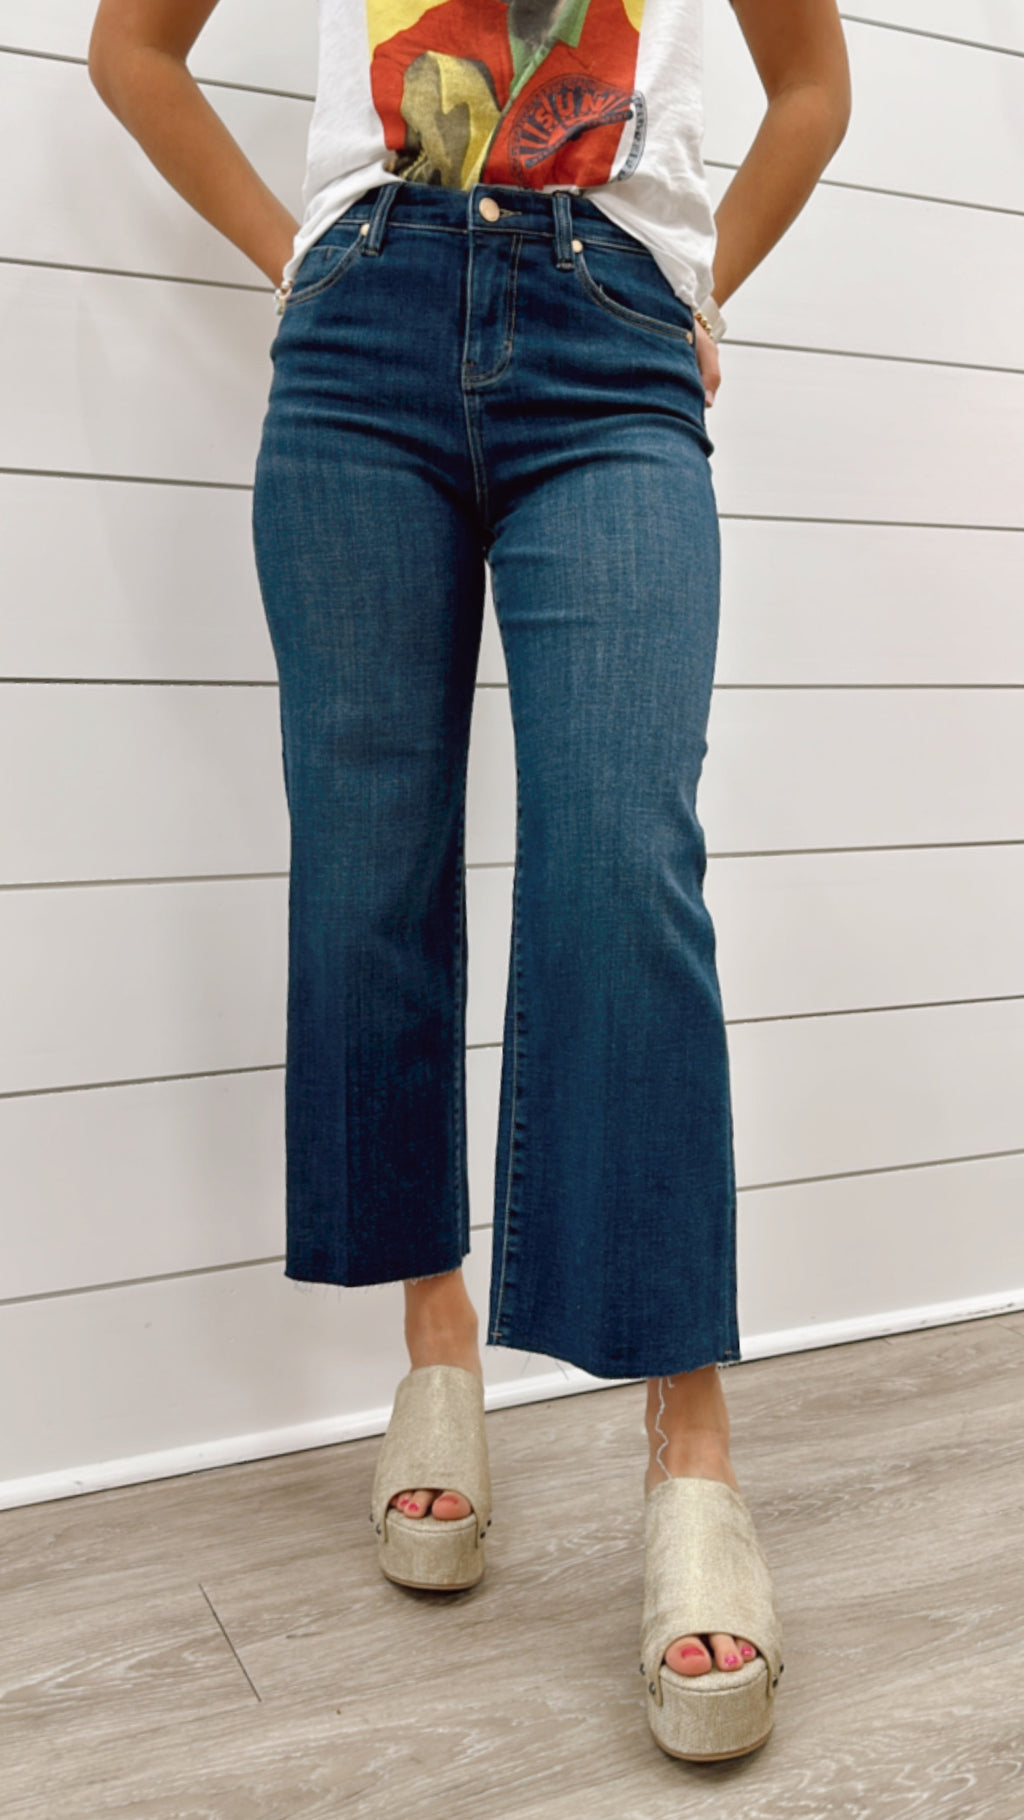 Liverpool Stride Wide Leg Cropped Jean in Bowers Wash